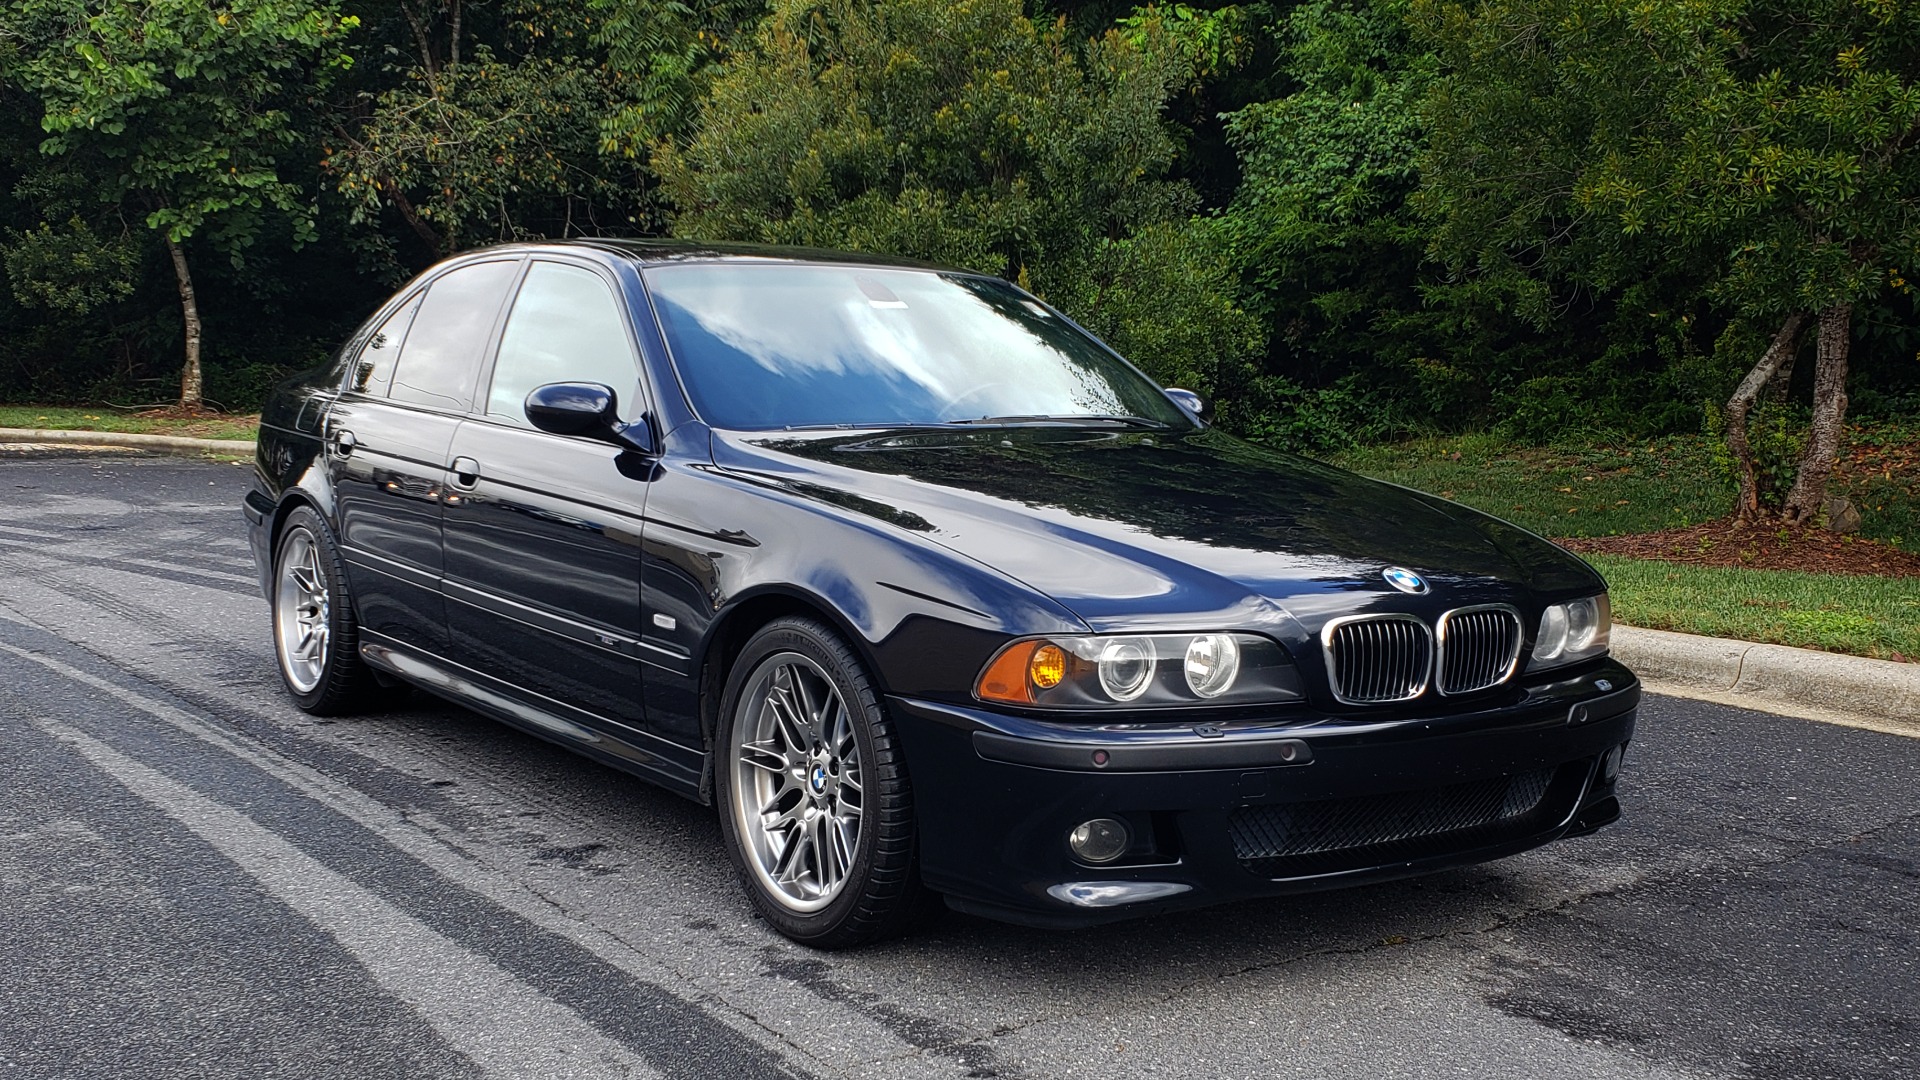 Used 2003 BMW 5 SERIES M5 / 6-SPD MAN / NAV / PARK DIST CNTRL / PREM SND / SUNROOF for sale Sold at Formula Imports in Charlotte NC 28227 7